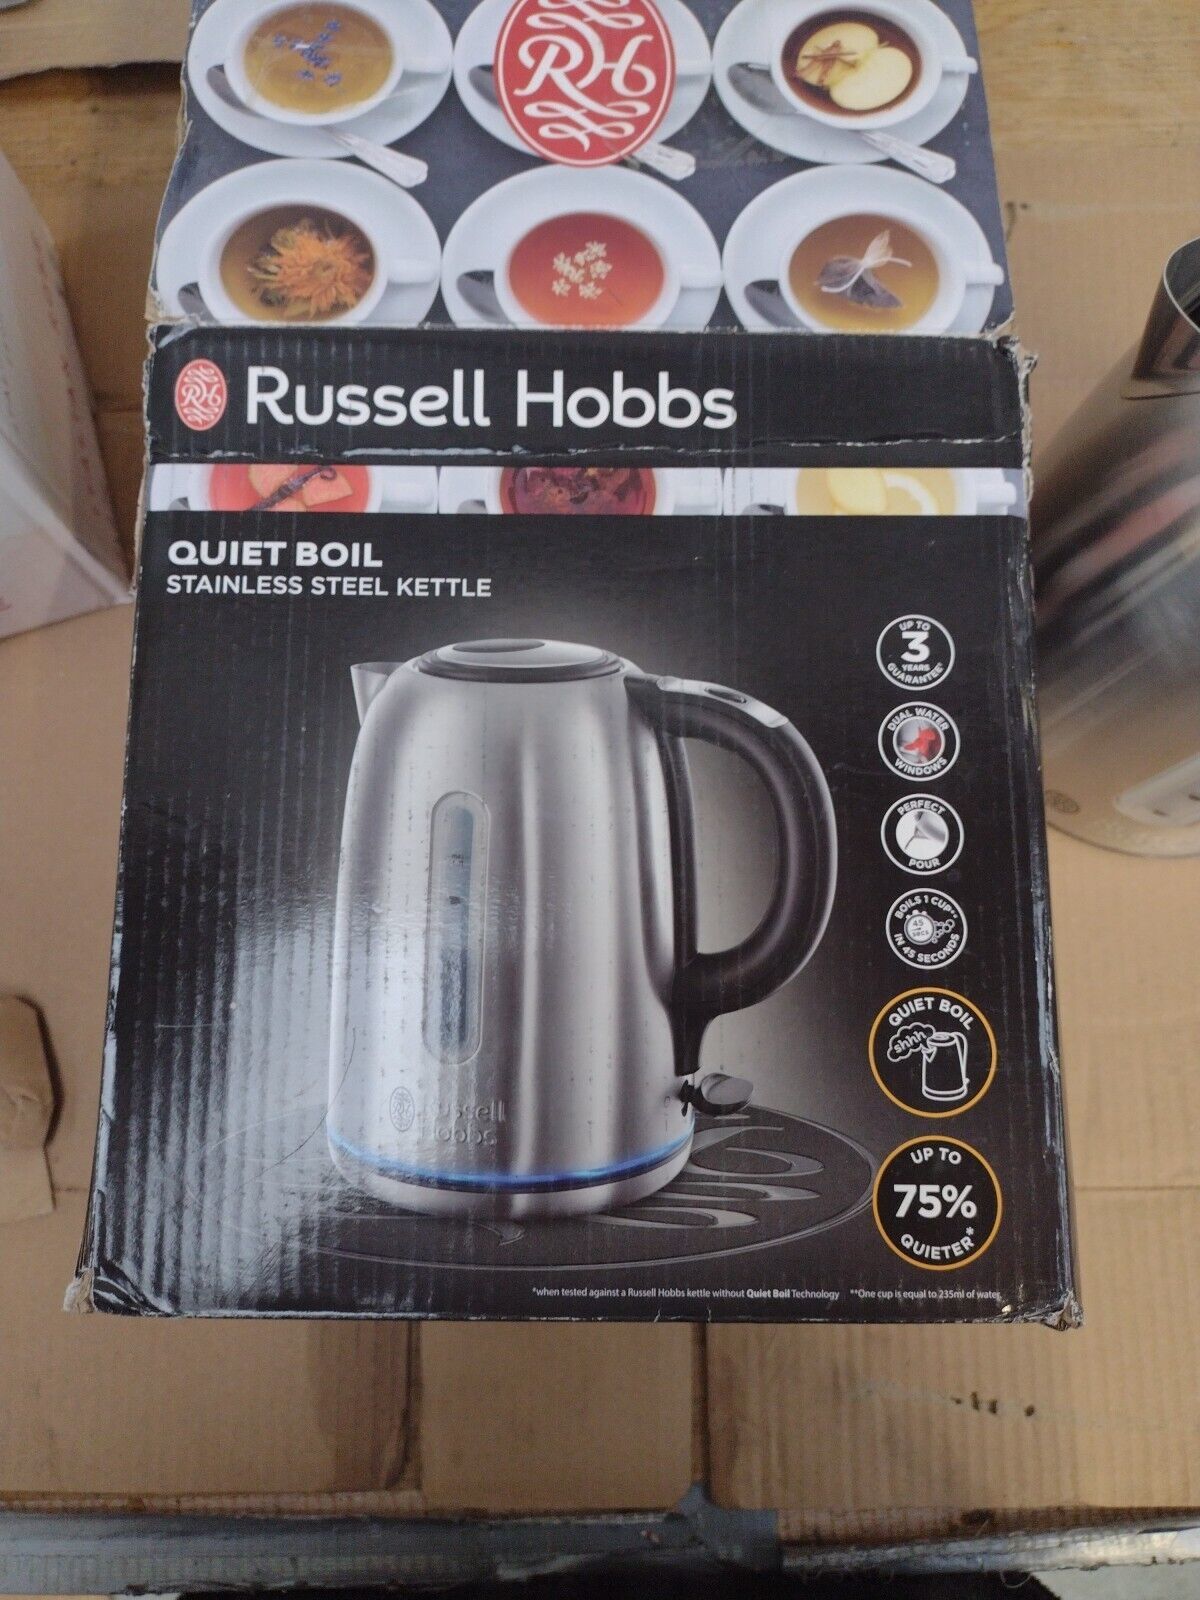 Russell Hobbs 20460 1.7L Kettle Silver - $25.24